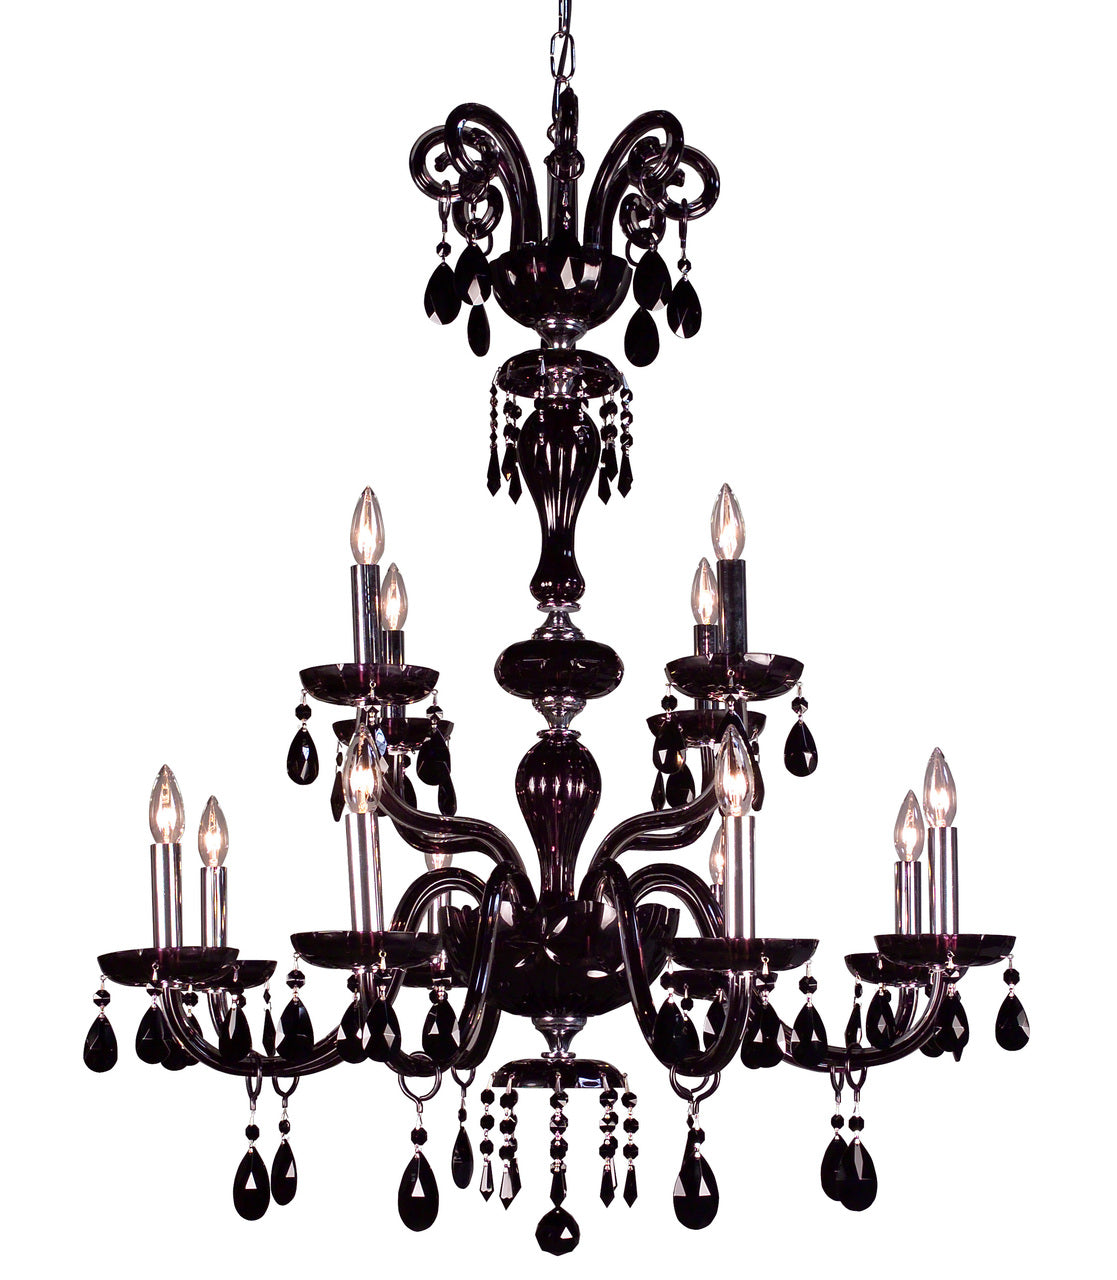 Classic Lighting 82008 SJT Monte Carlo Crystal Chandelier in Black (Imported from Spain)